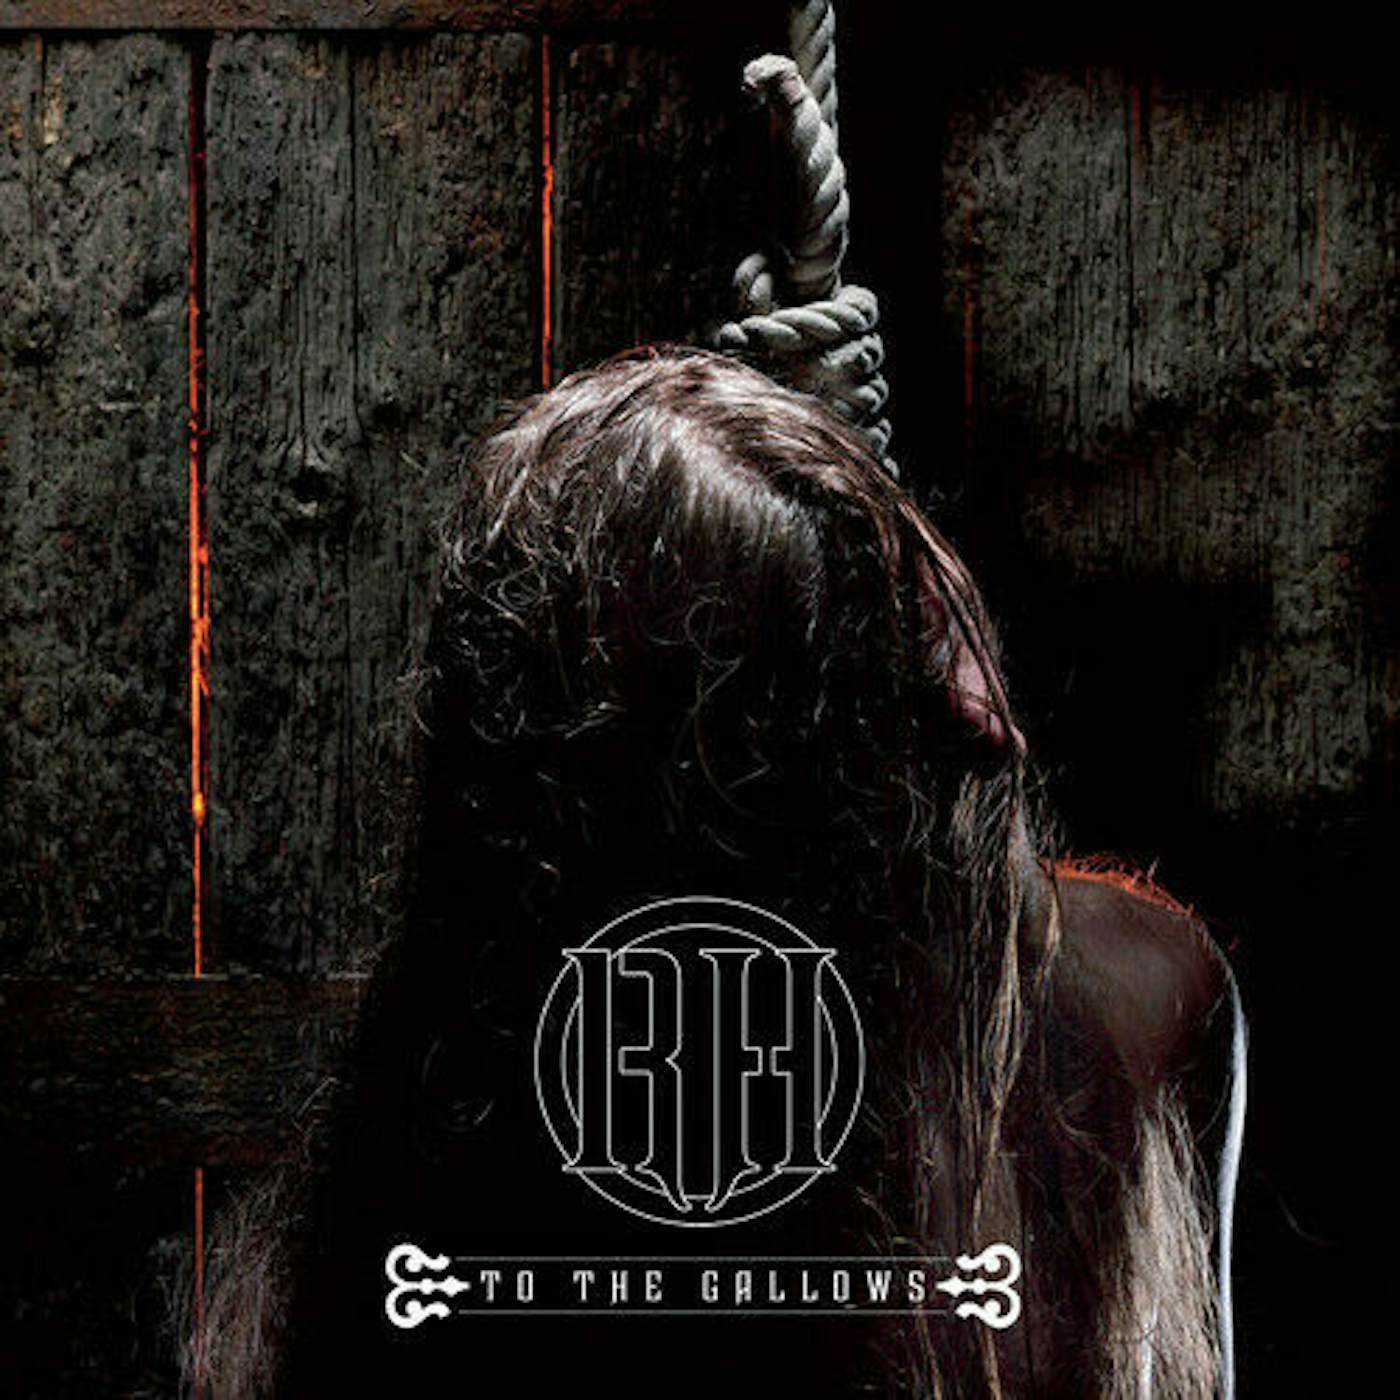 Raise Hell To The Gallows Vinyl Record